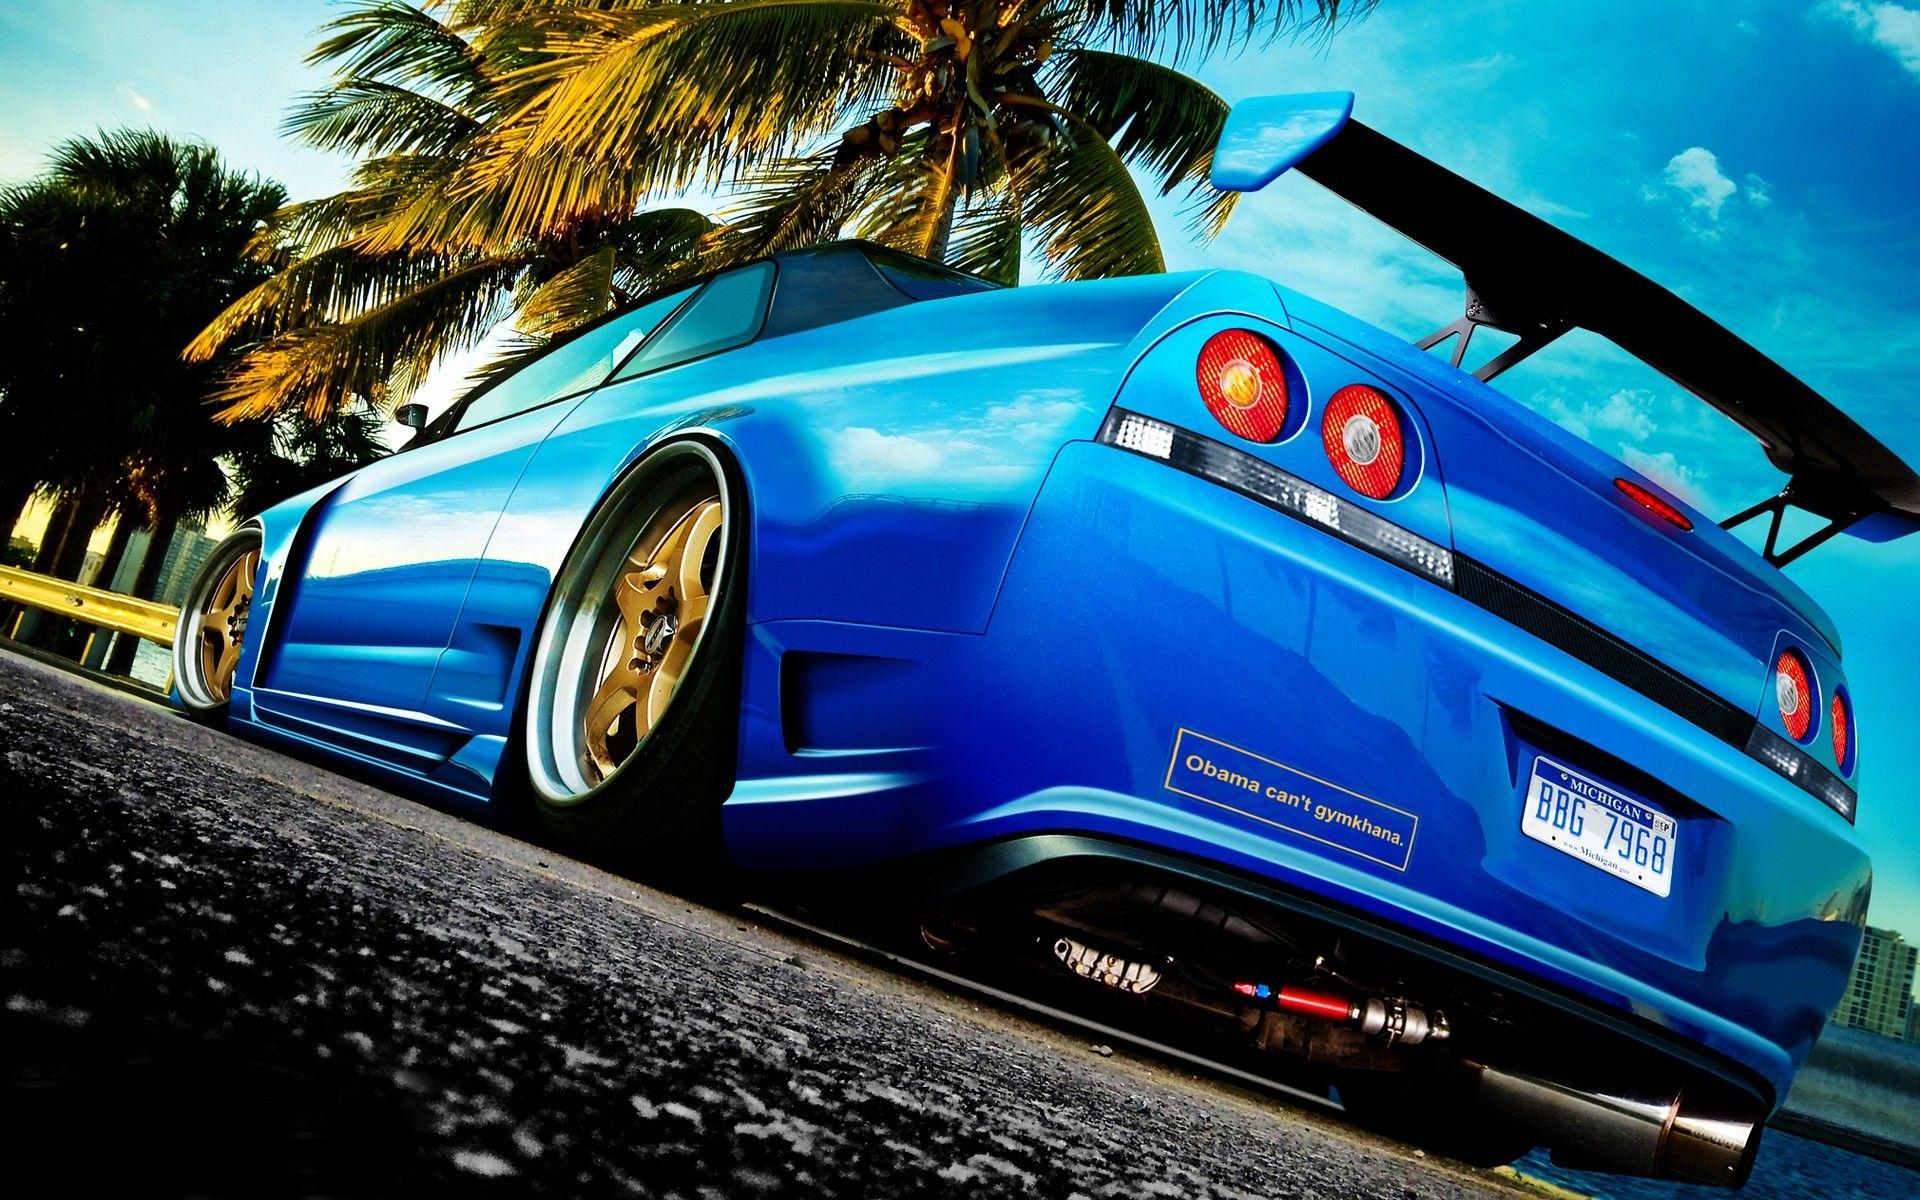 Nissan Skyline R33. Android wallpaper for free